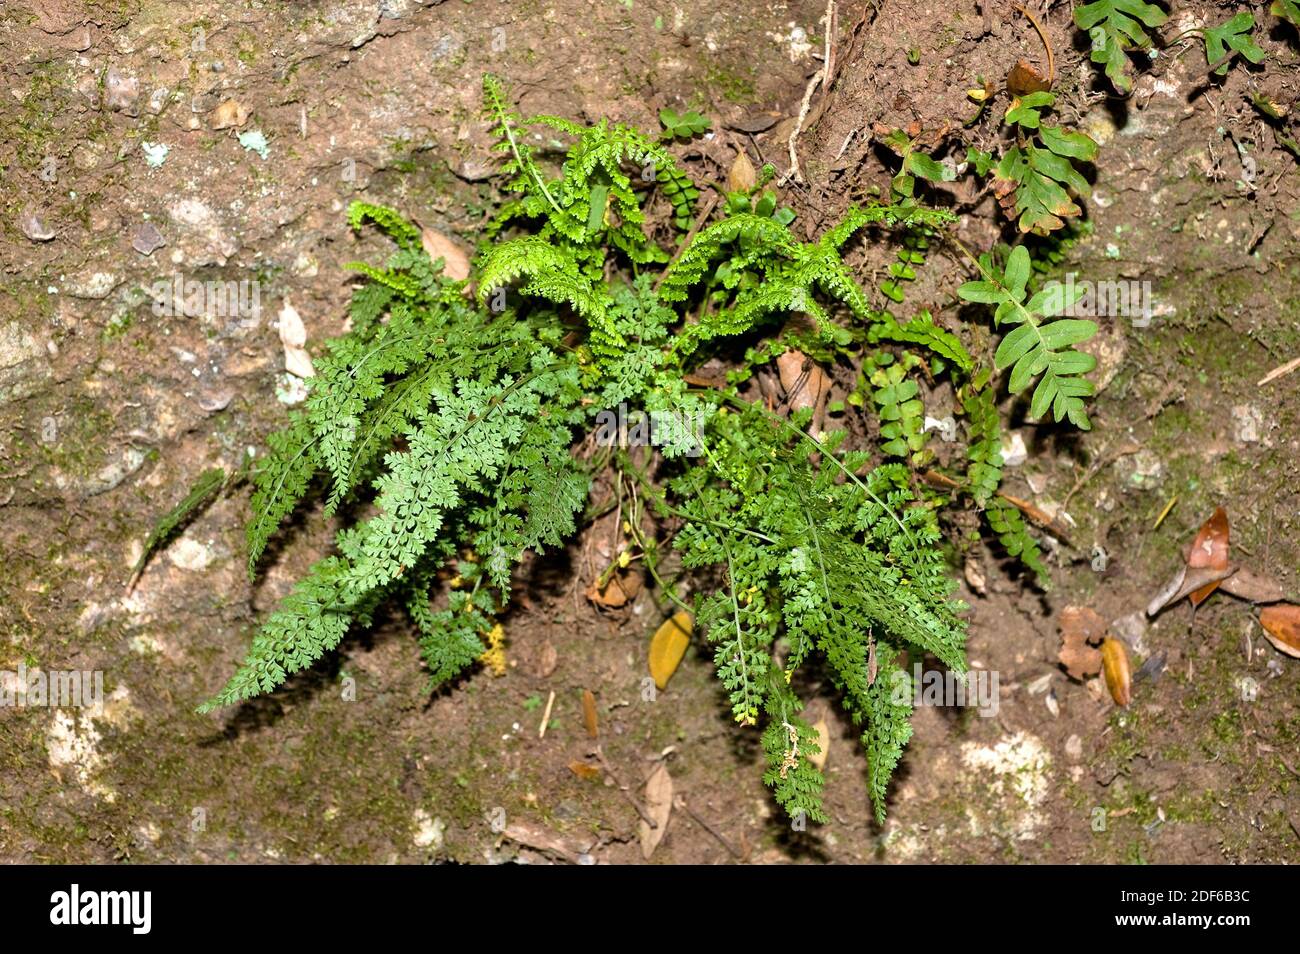 Cliff fern (Asplenium fontanum) with fronds two or three times pinnates. Distribution: Western Europe and North Africa. This photo was taken in Stock Photo